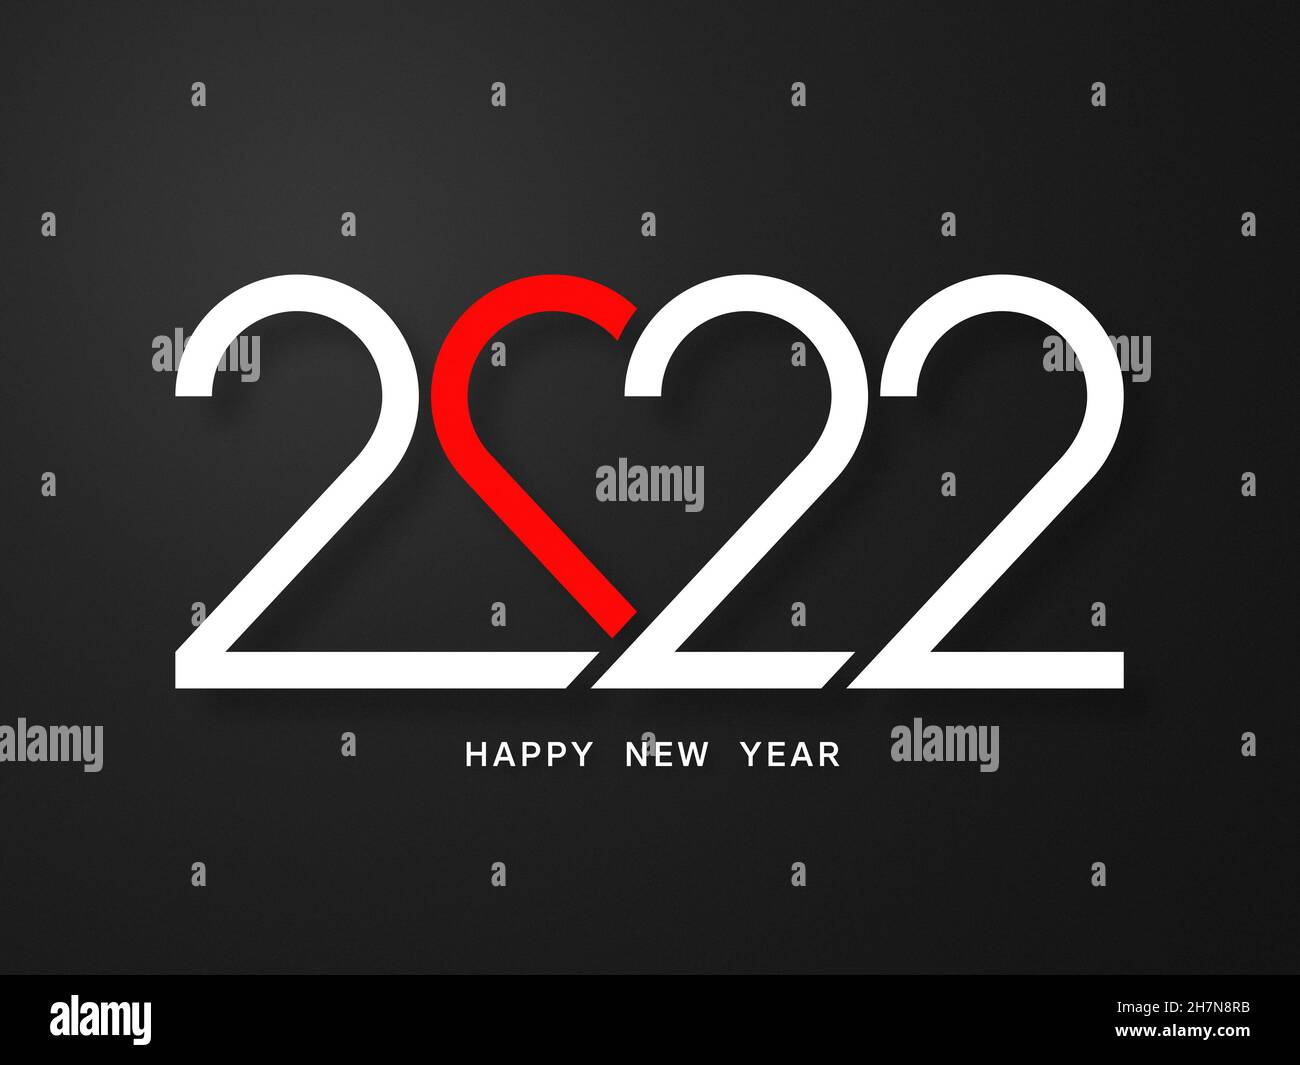 Romantic Happy New Year 2022 Love Image! You Can Send To Send ...